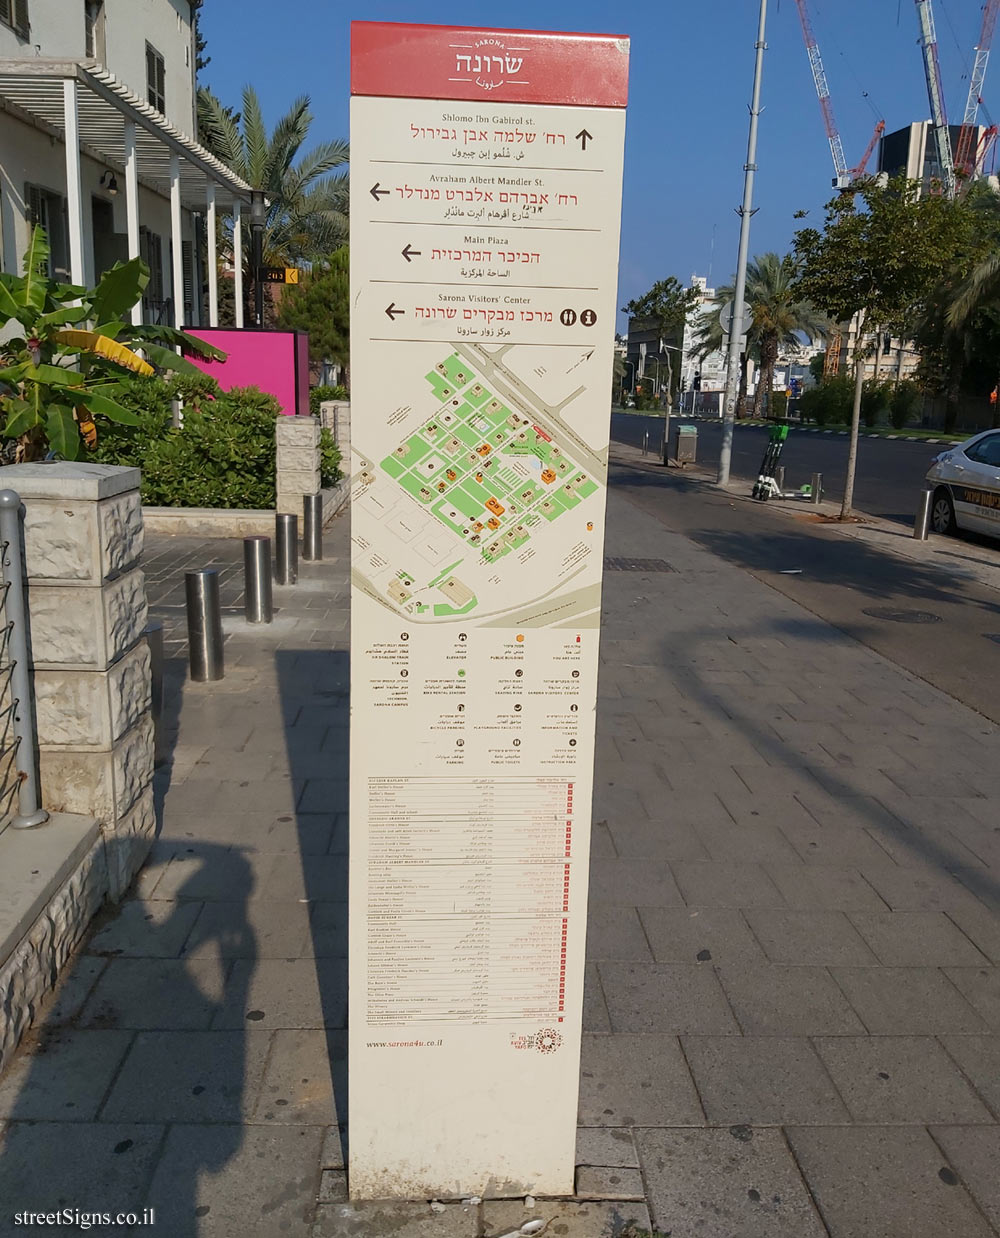 Tel Aviv - Sarona Complex - A direction sign for the streets and sites on the site